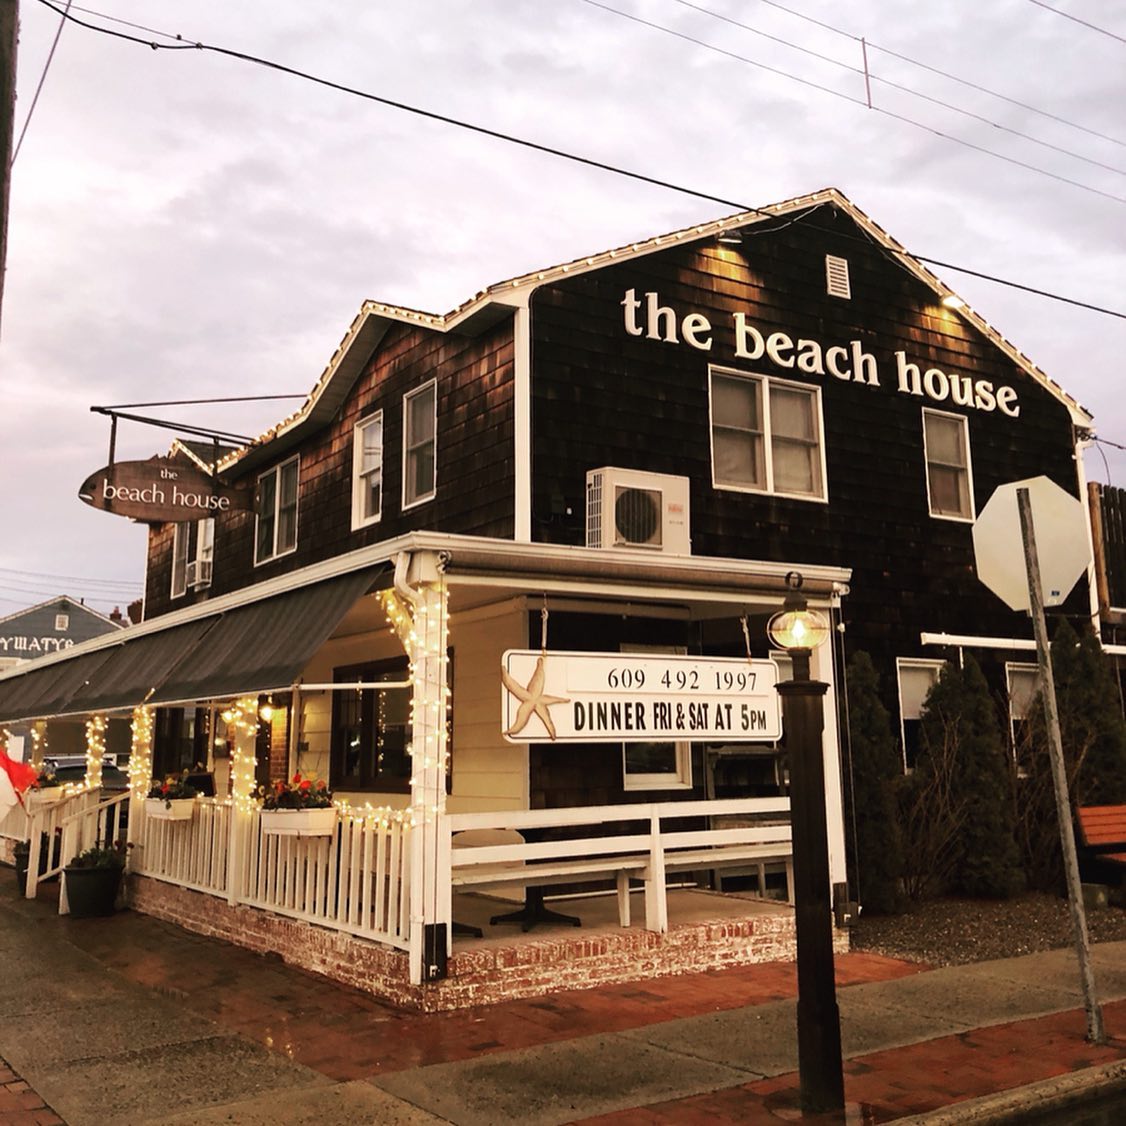 The Beach House Restaurant - Welcome to LBI